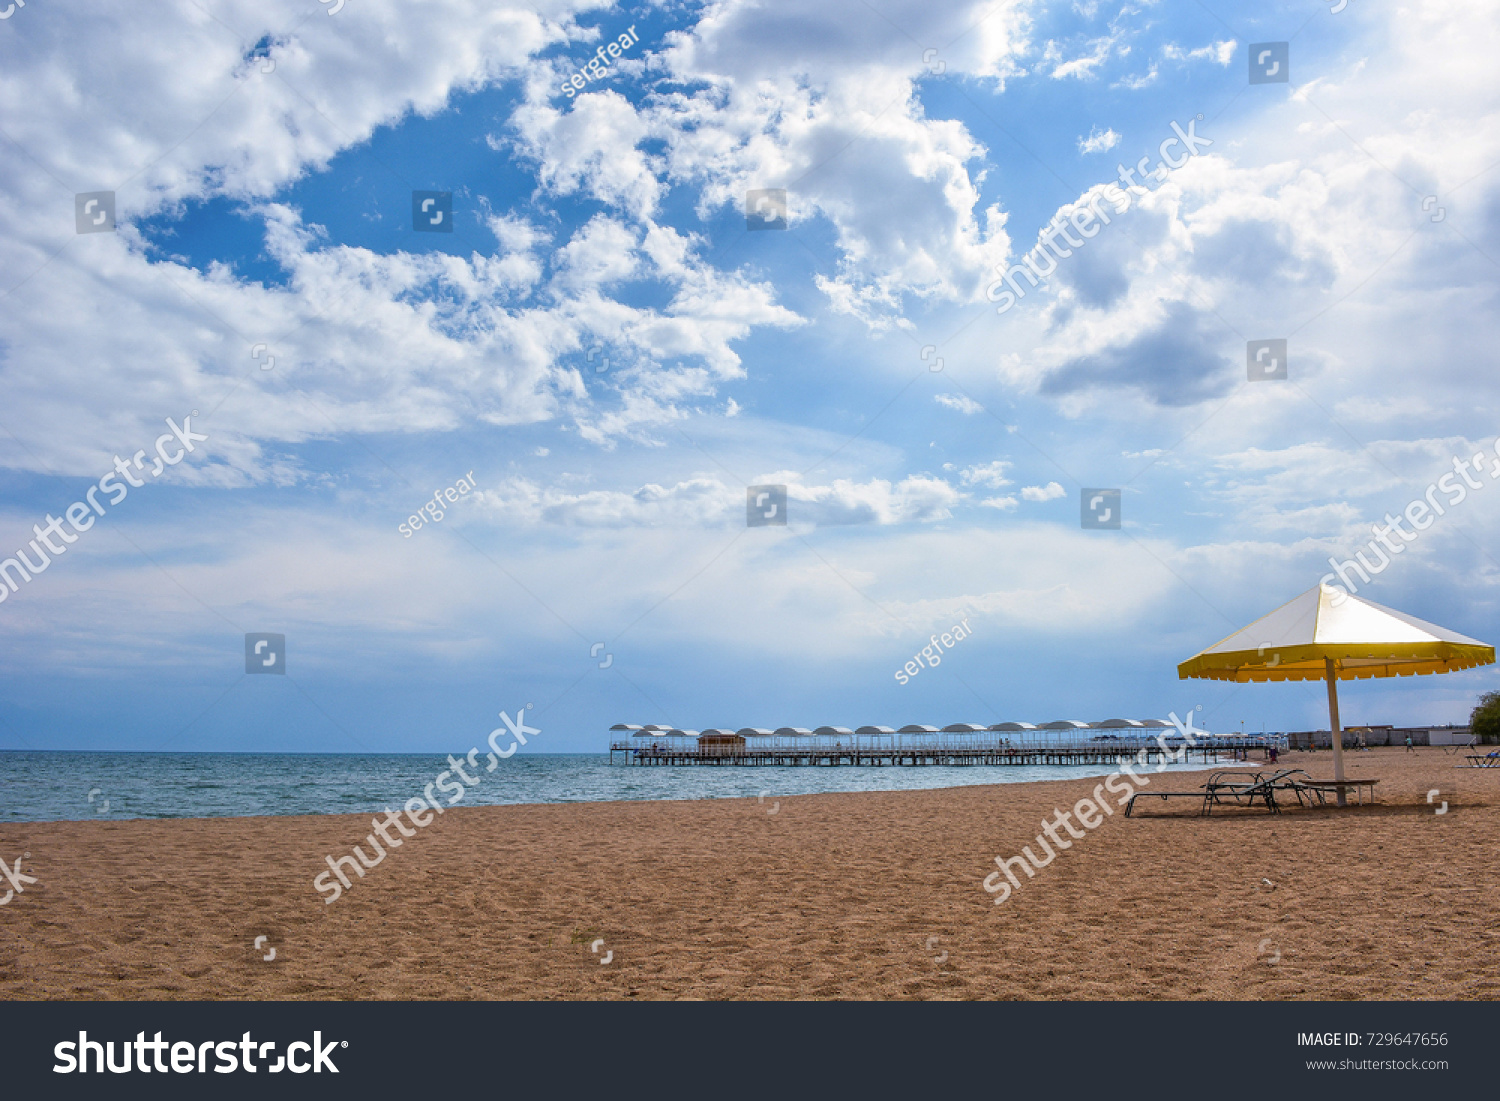 Beautiful scenic view - distant open wood amid the calm water of Issyk-Kul Lake against the background of Tien Shan mountain range and cloudy blue sky, Kyrgyzstan, Central Asia #729647656